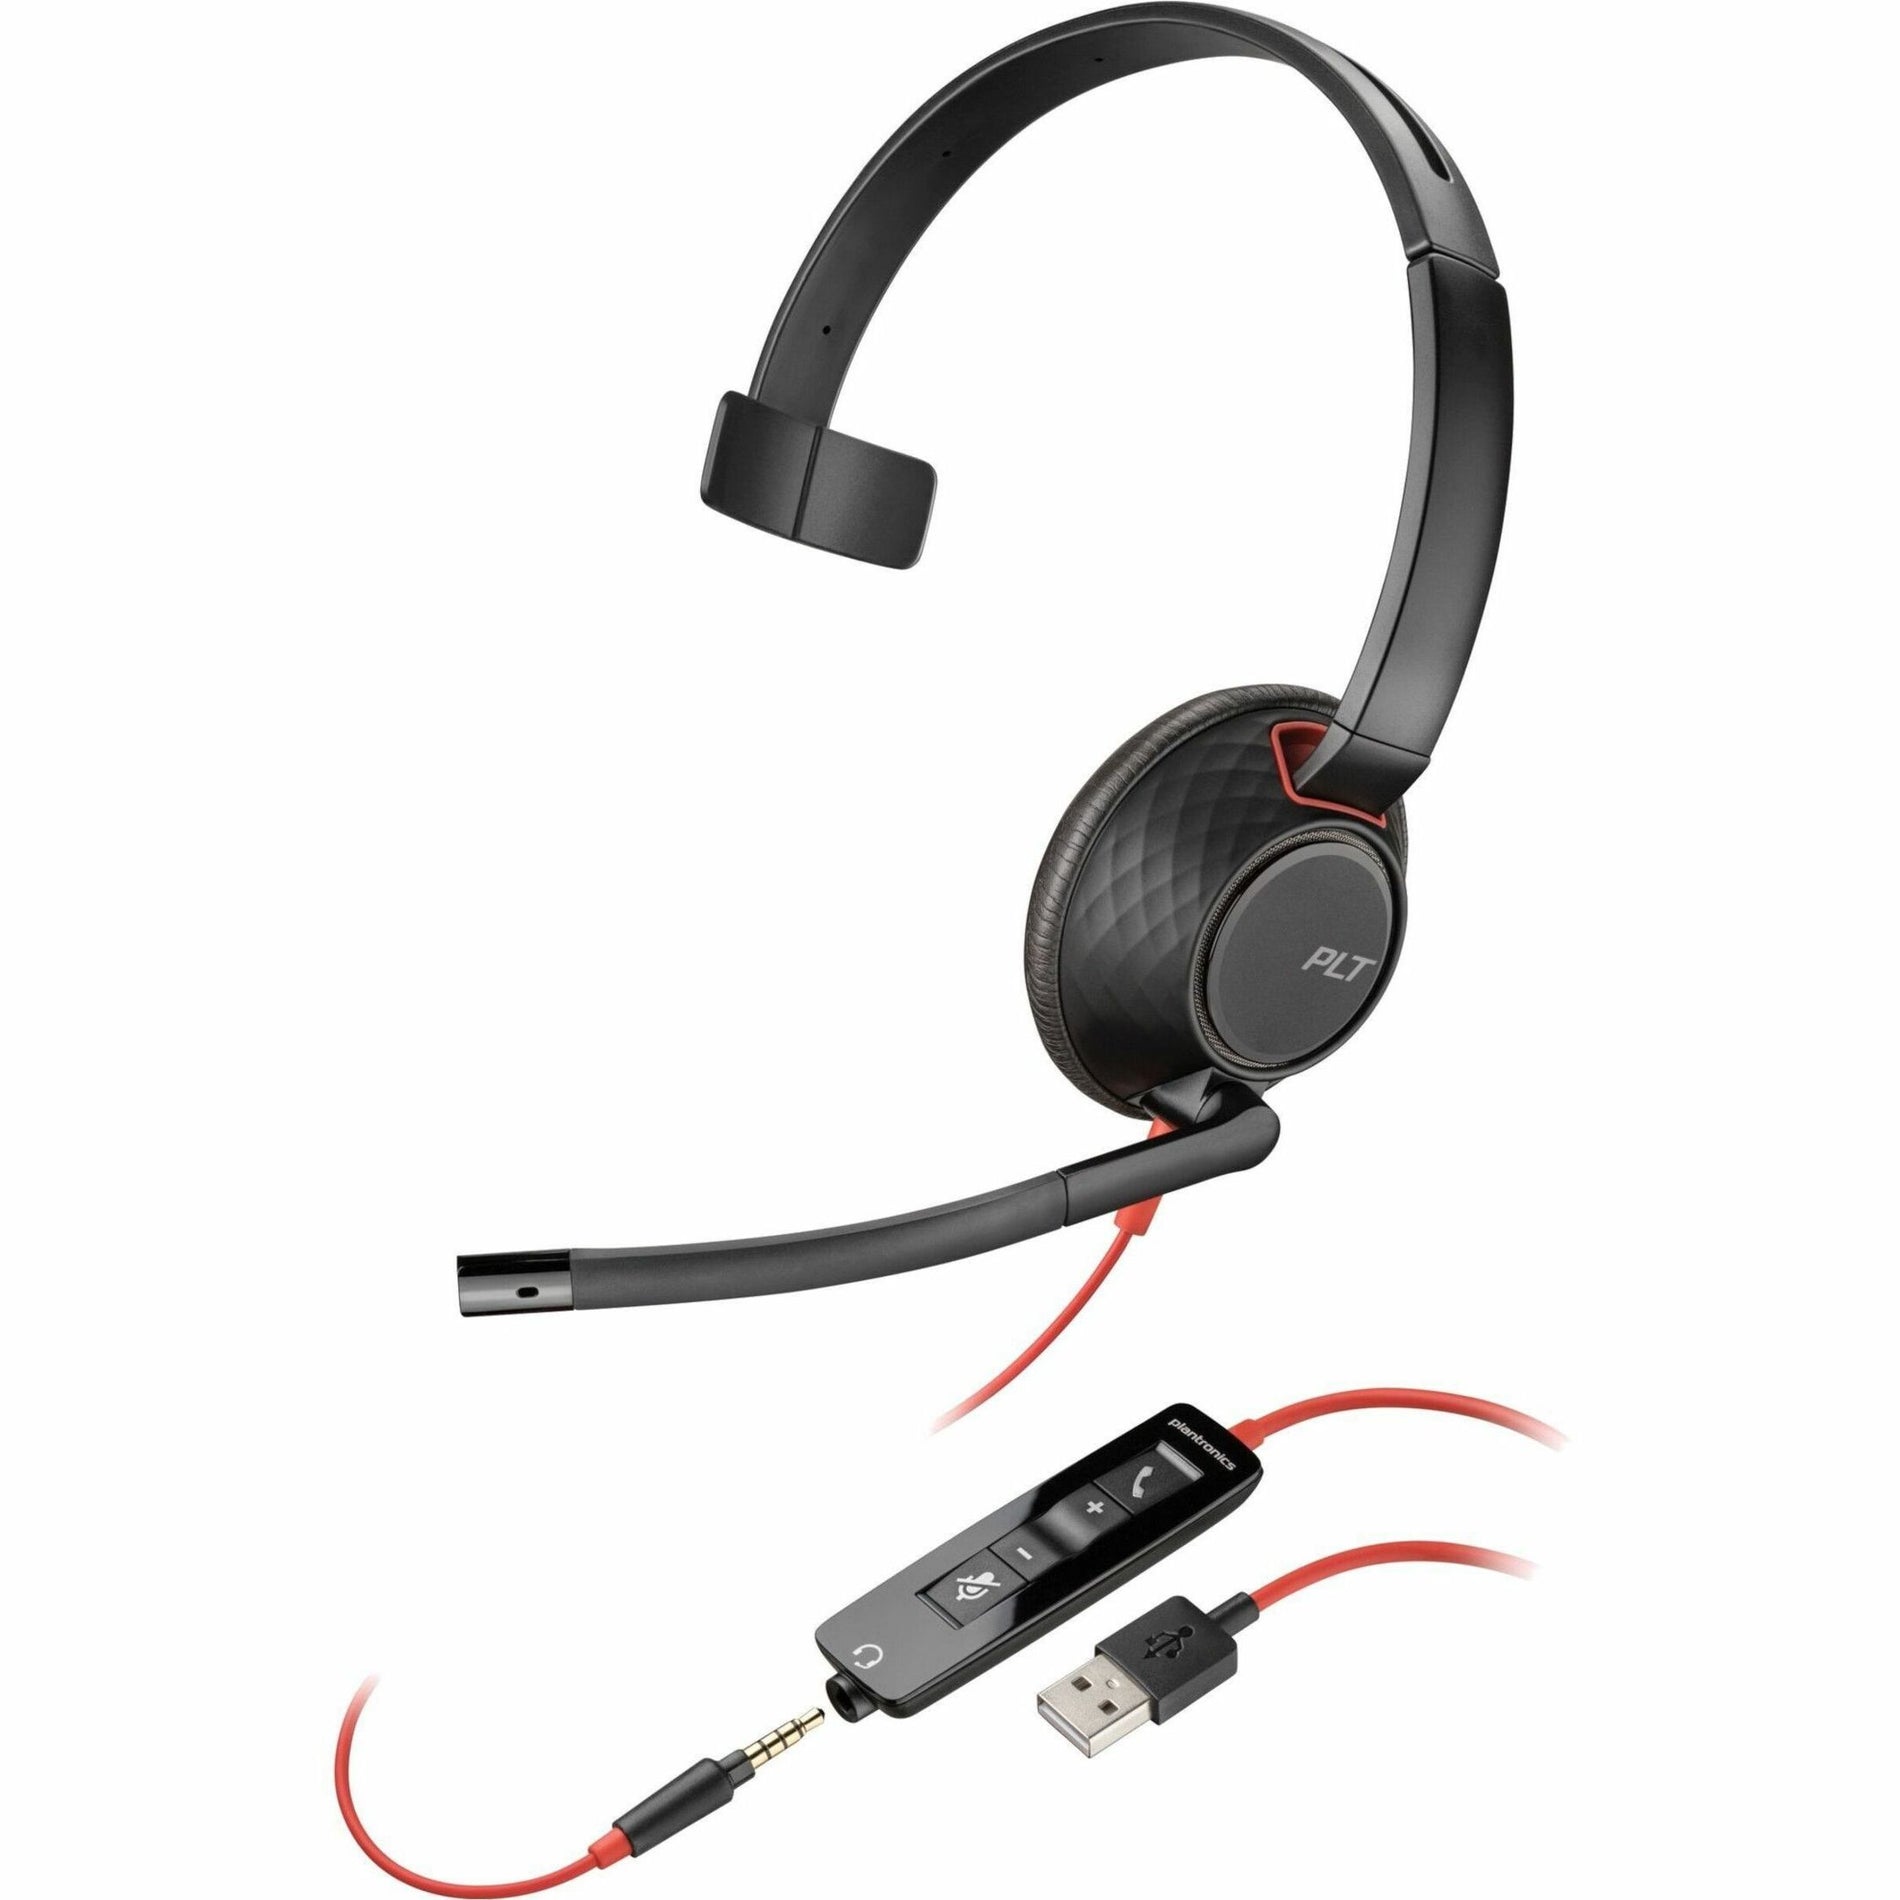 Poly Blackwire 5210 Headset On-ear Over-the-head Boom Microphone Noise Cancelling TAA Compliant Poly Blackwire 5210 Headset On-ear Over-the-head Boom Microphone Noise Cancelling TAA Compliant